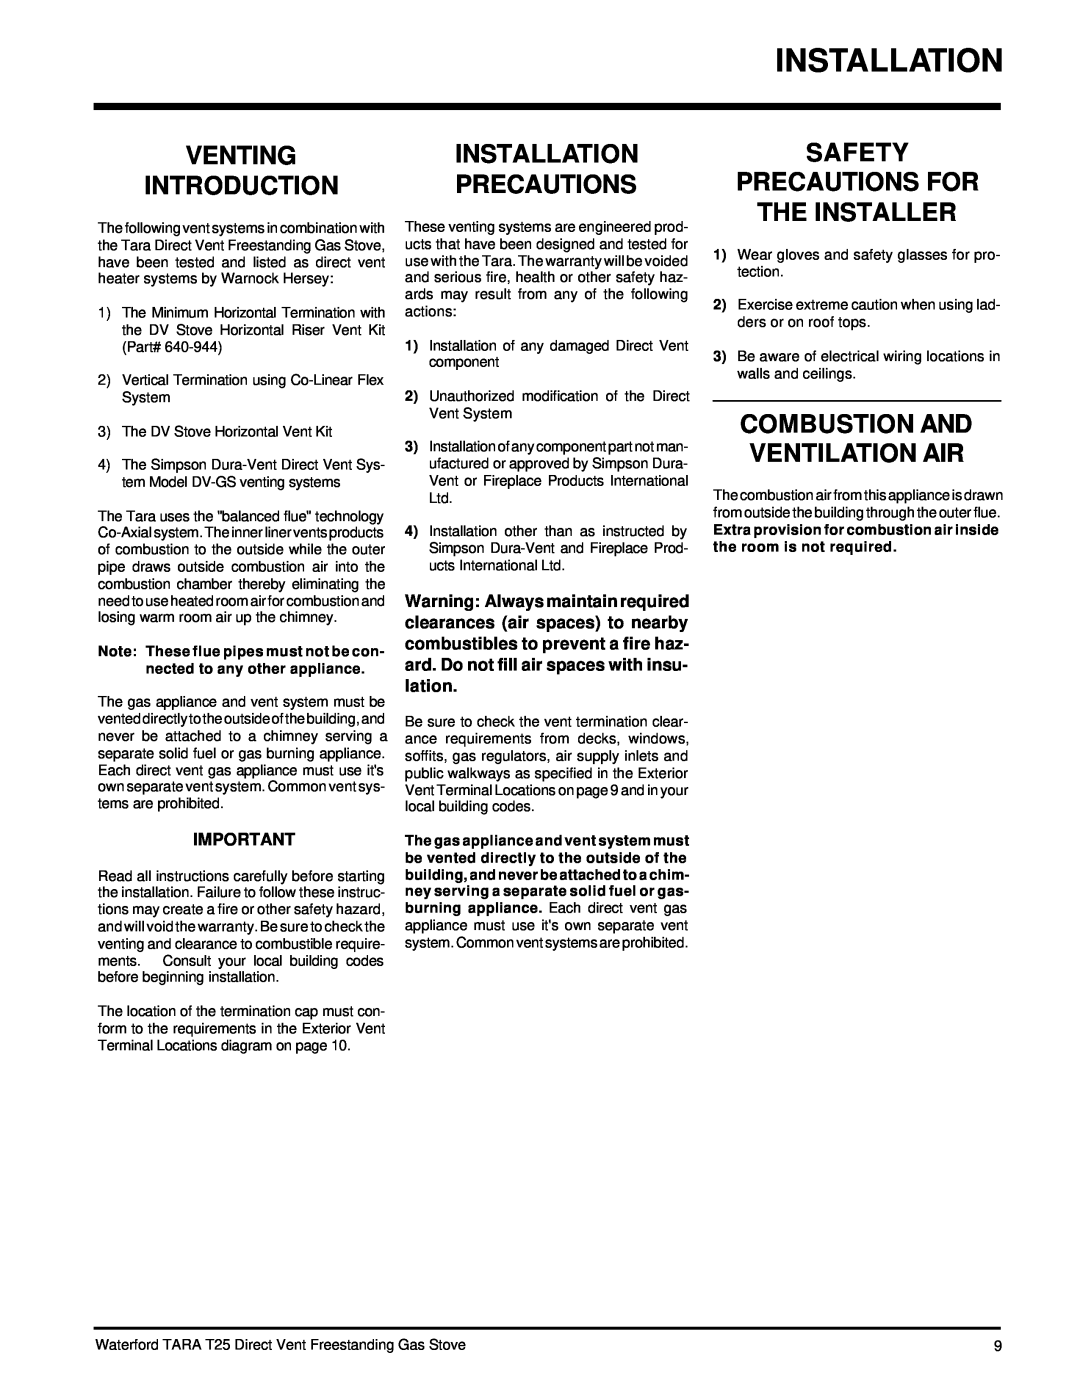 Waterford Appliances T25-LP, T25-NG Ventinginstallation Introduction Precautions, Safety Precautions For The Installer 